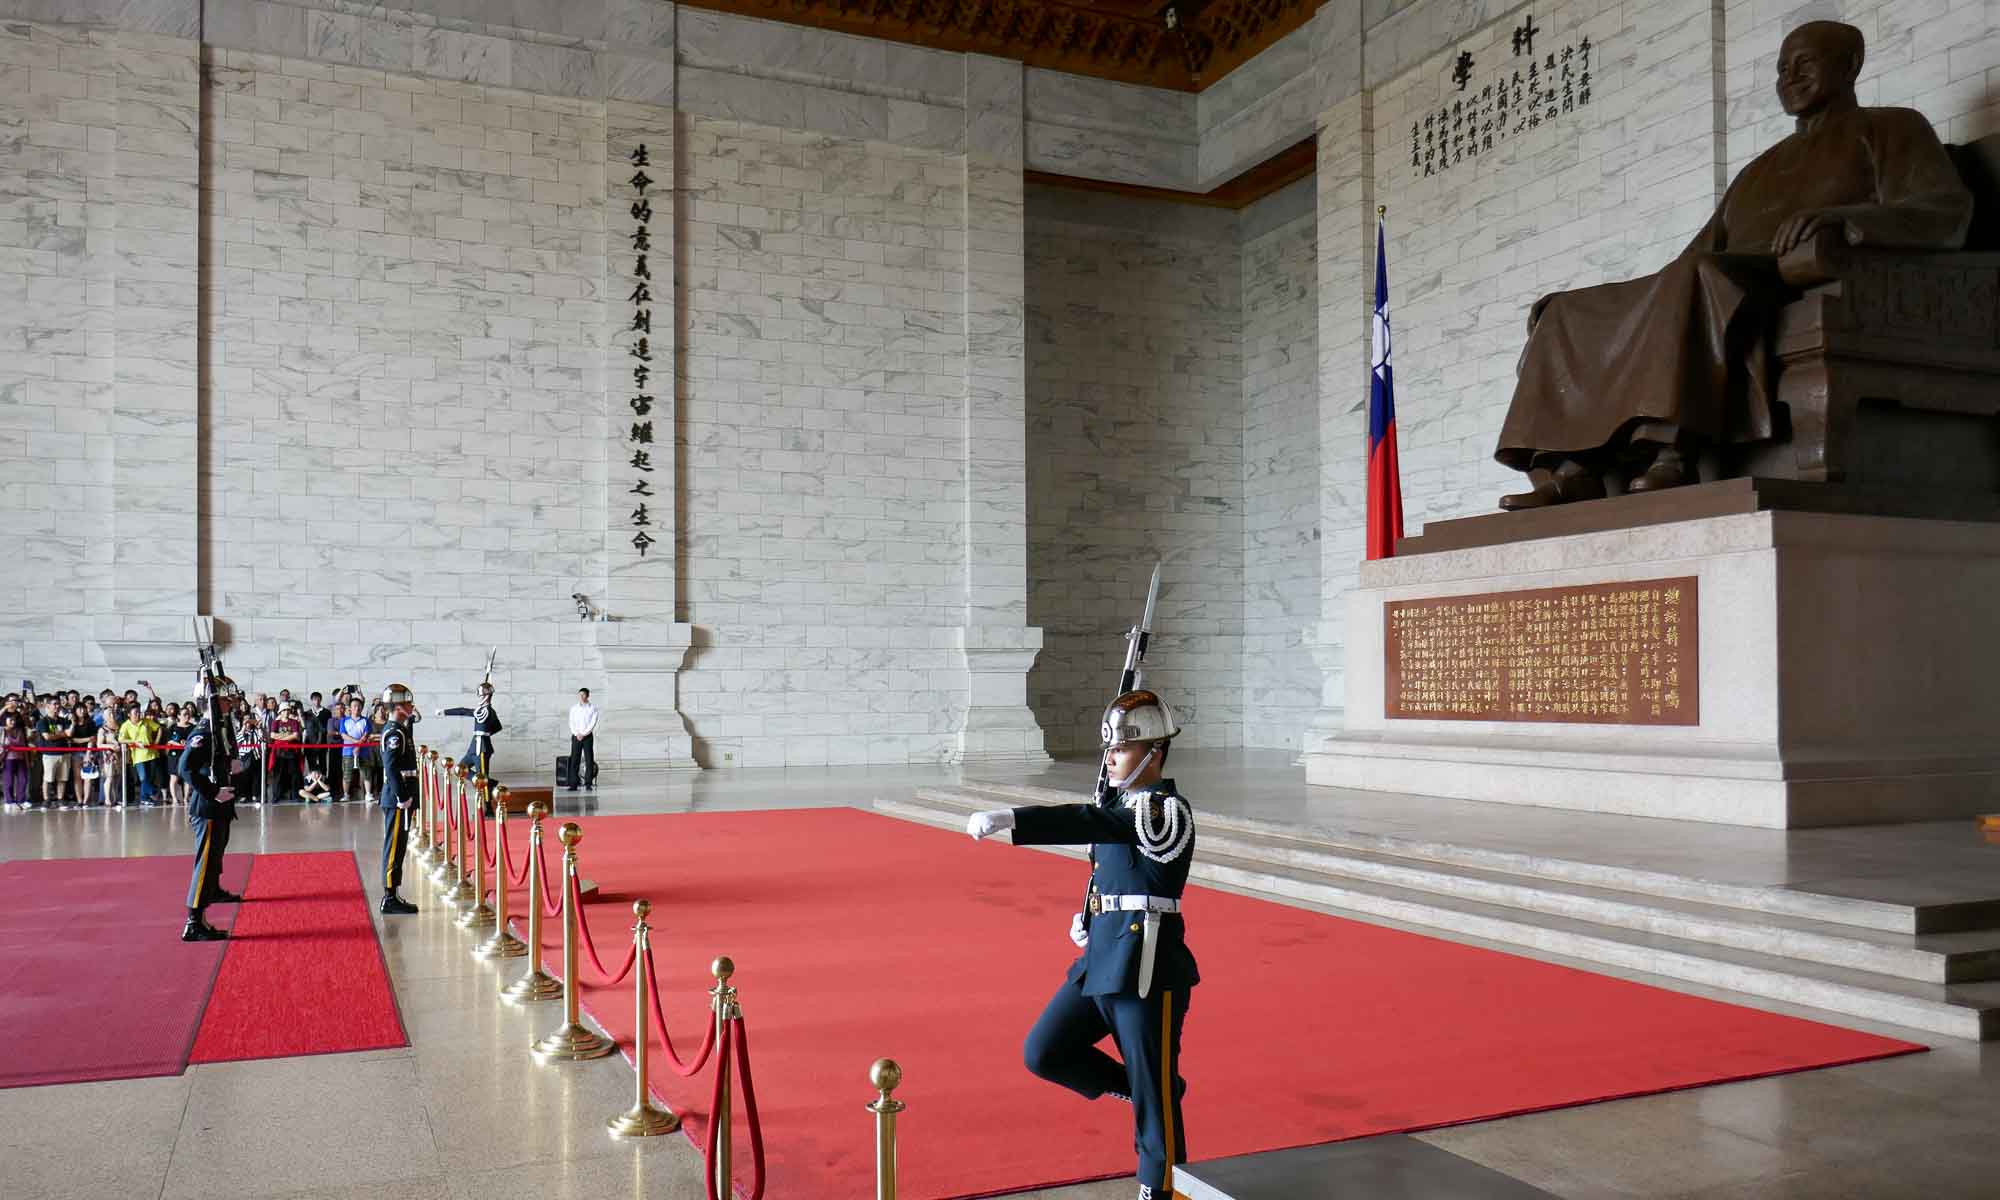 The 'changing of the guard' ceremony